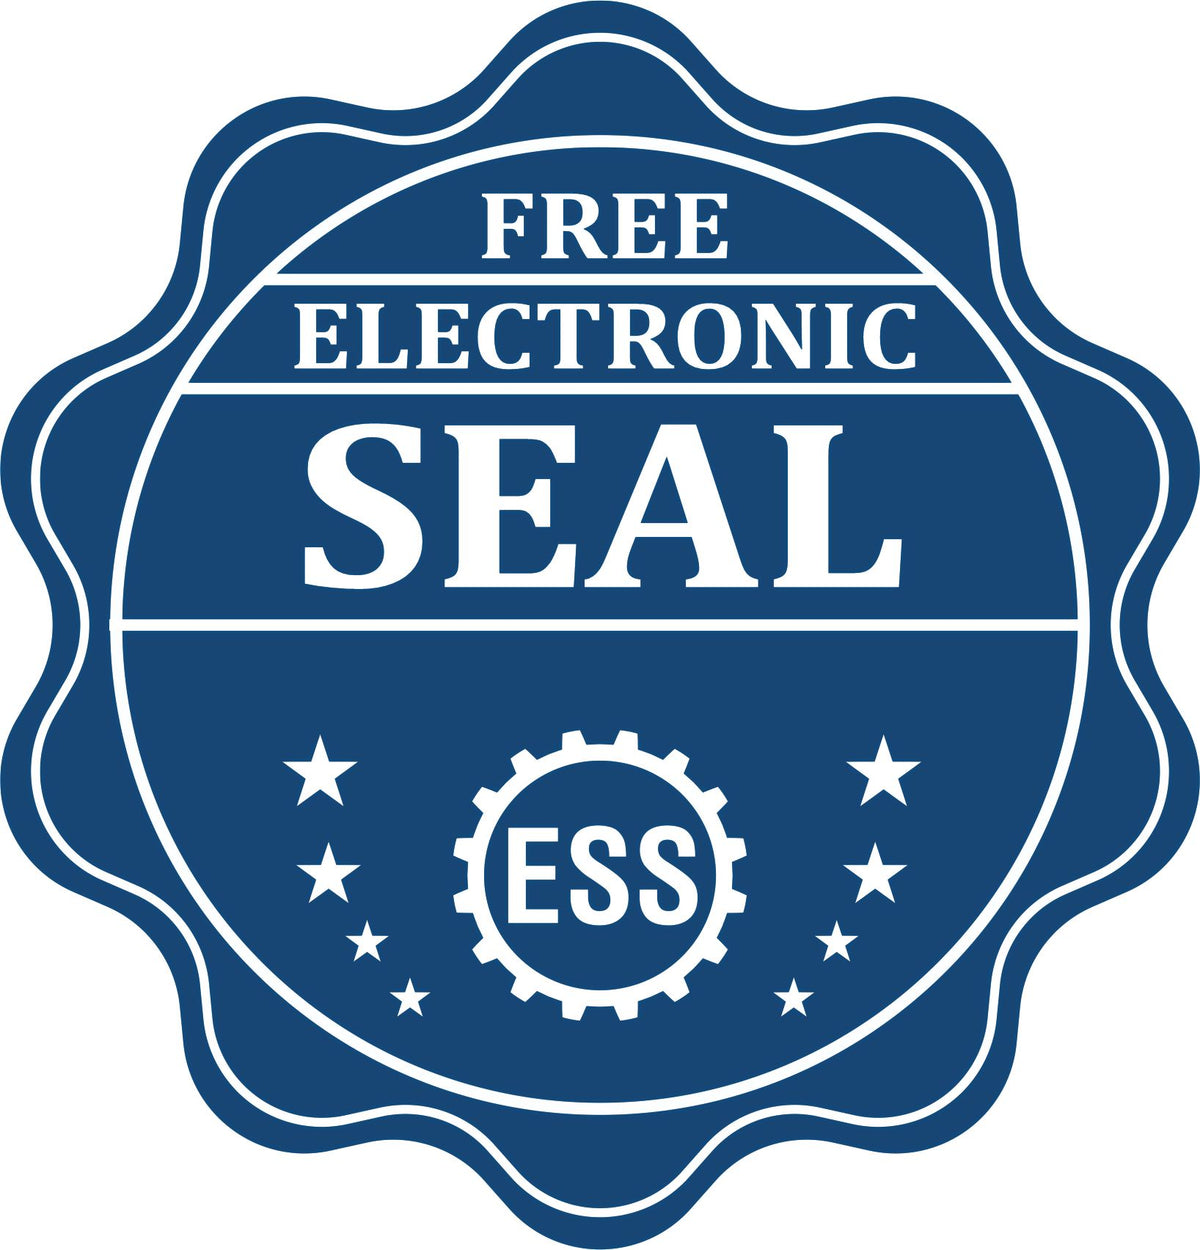 A badge showing a free electronic seal for the Gift Montana Geologist Seal with stars and the ESS gear on the emblem.